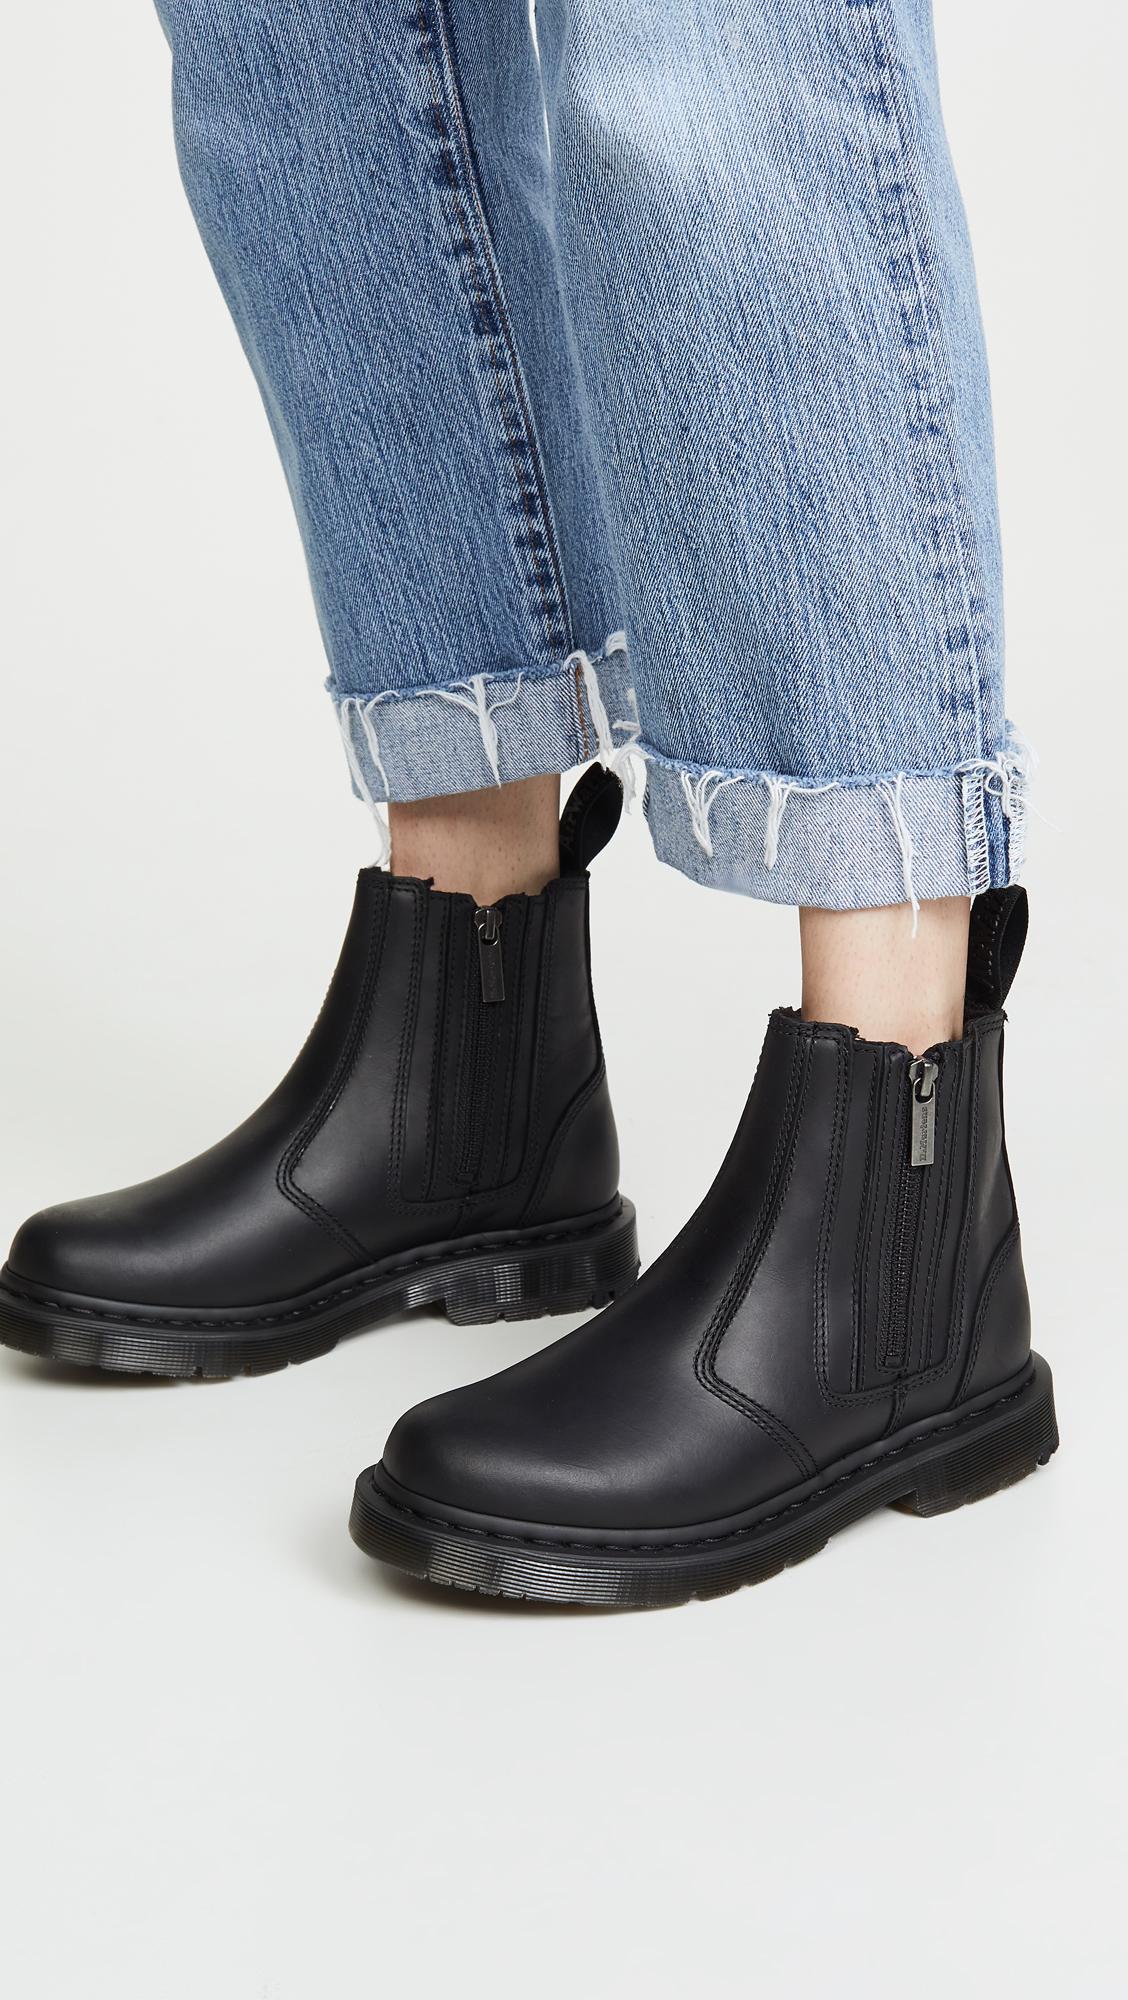 Dr. Martens Leather 2976 Alyson Chelsea Boots With Zips in Black/Black ...